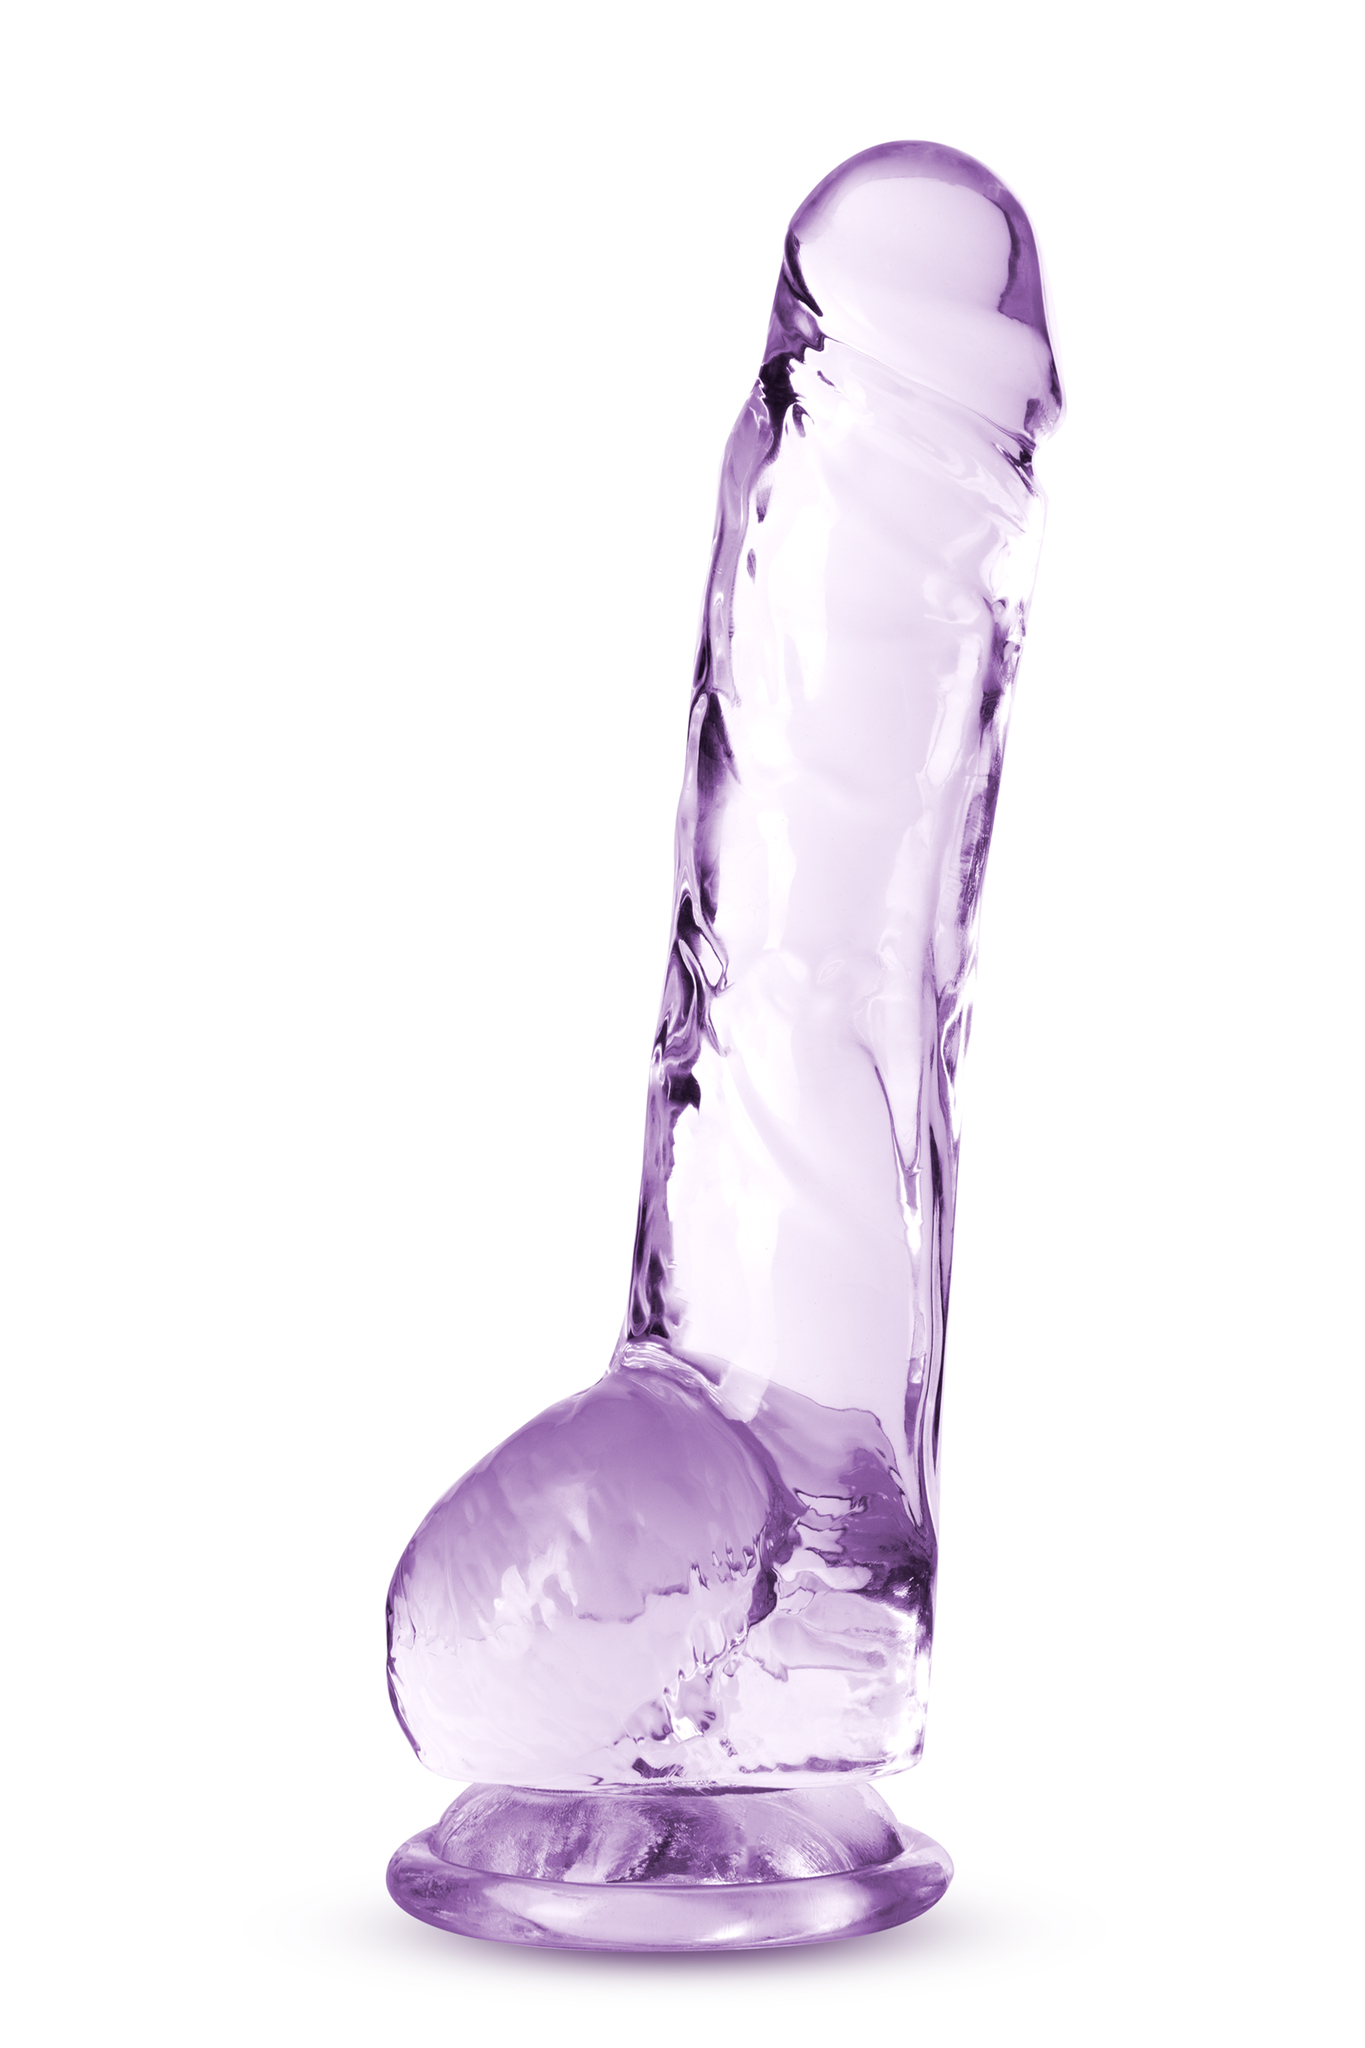 Naturally Yours 8" Crystalline Dildo, Amethyst